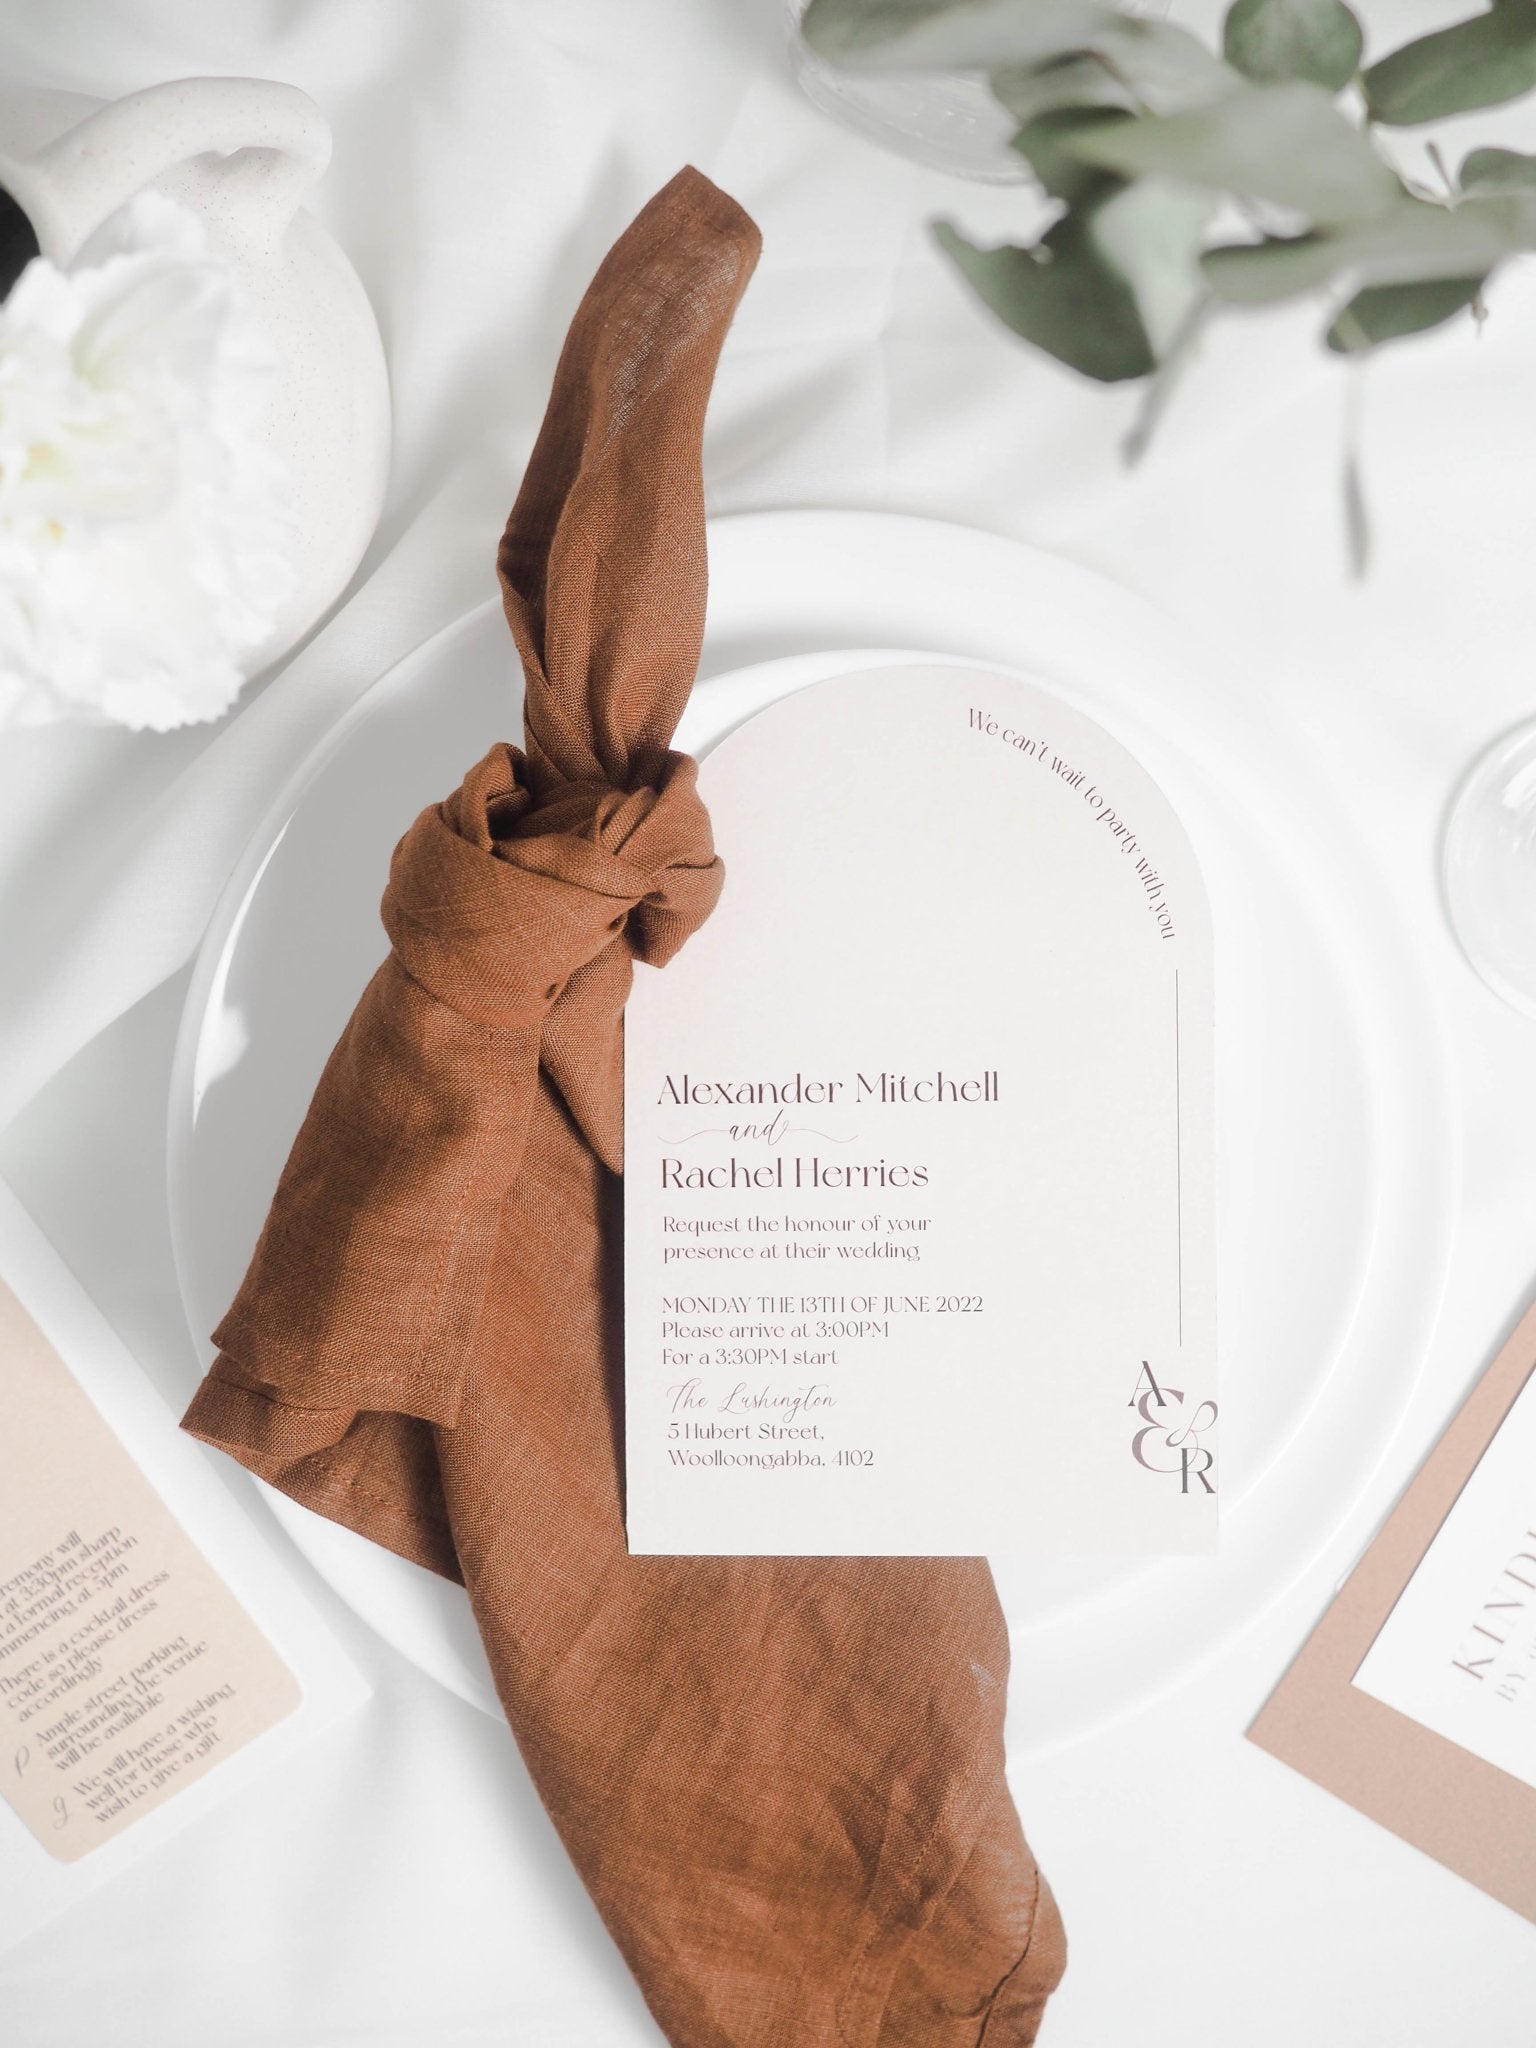 100% Linen Napkins - The Sustainable Life